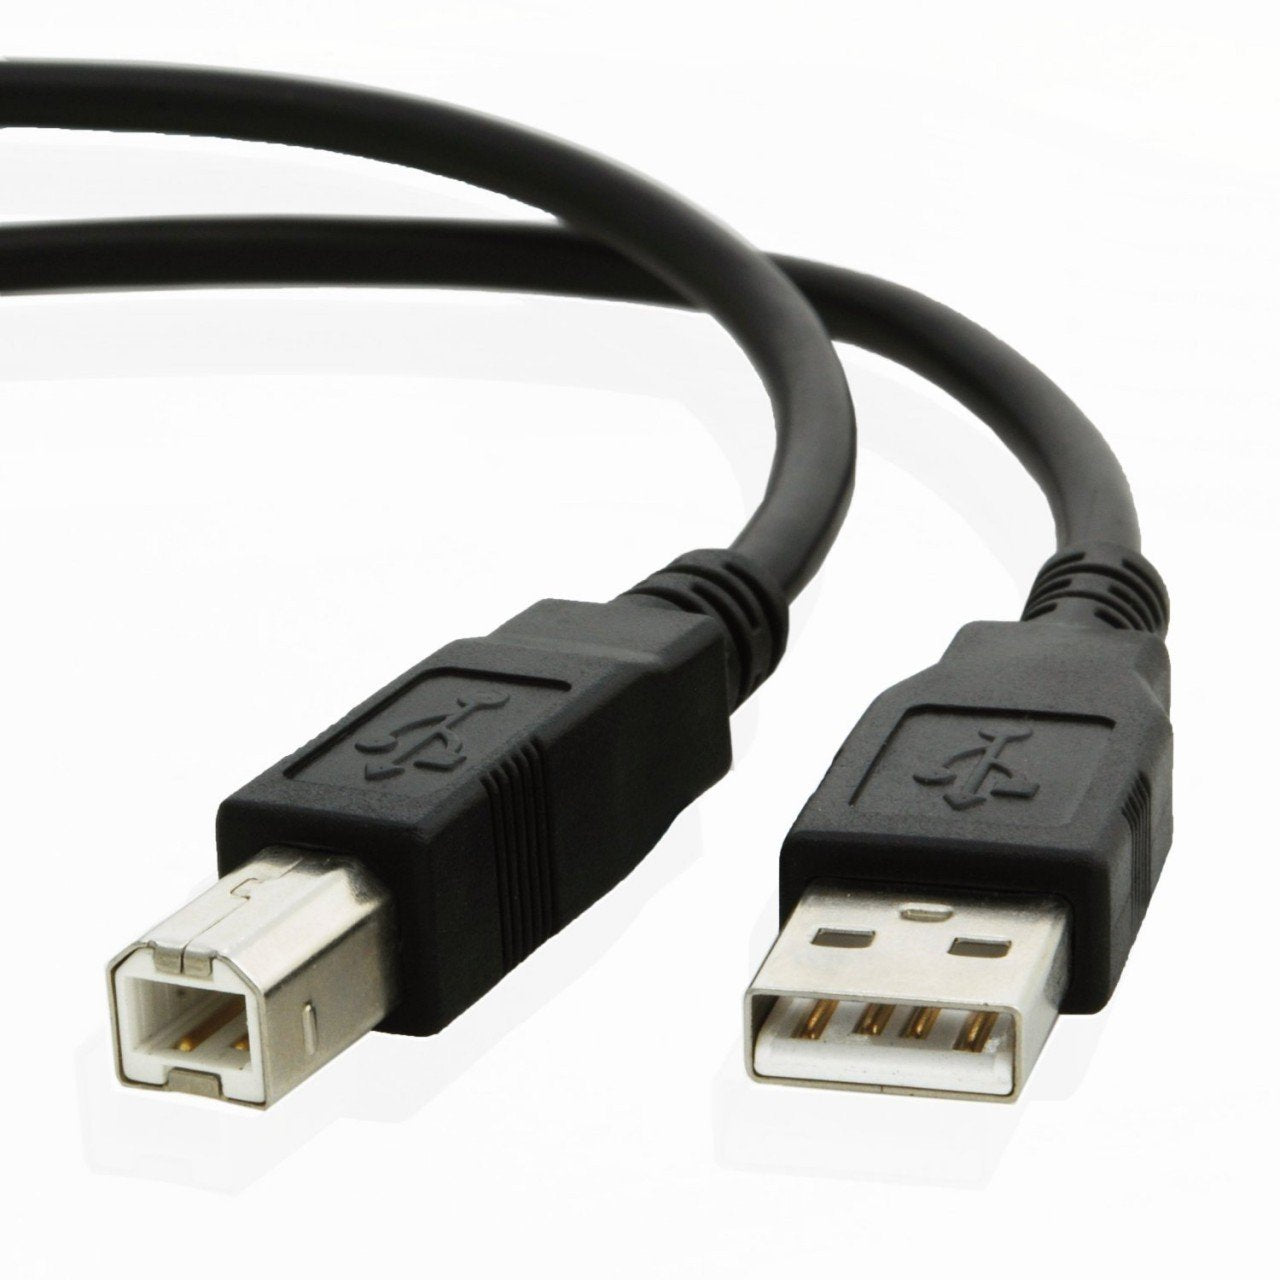 USB cable for Canon IMAGECLASS D570